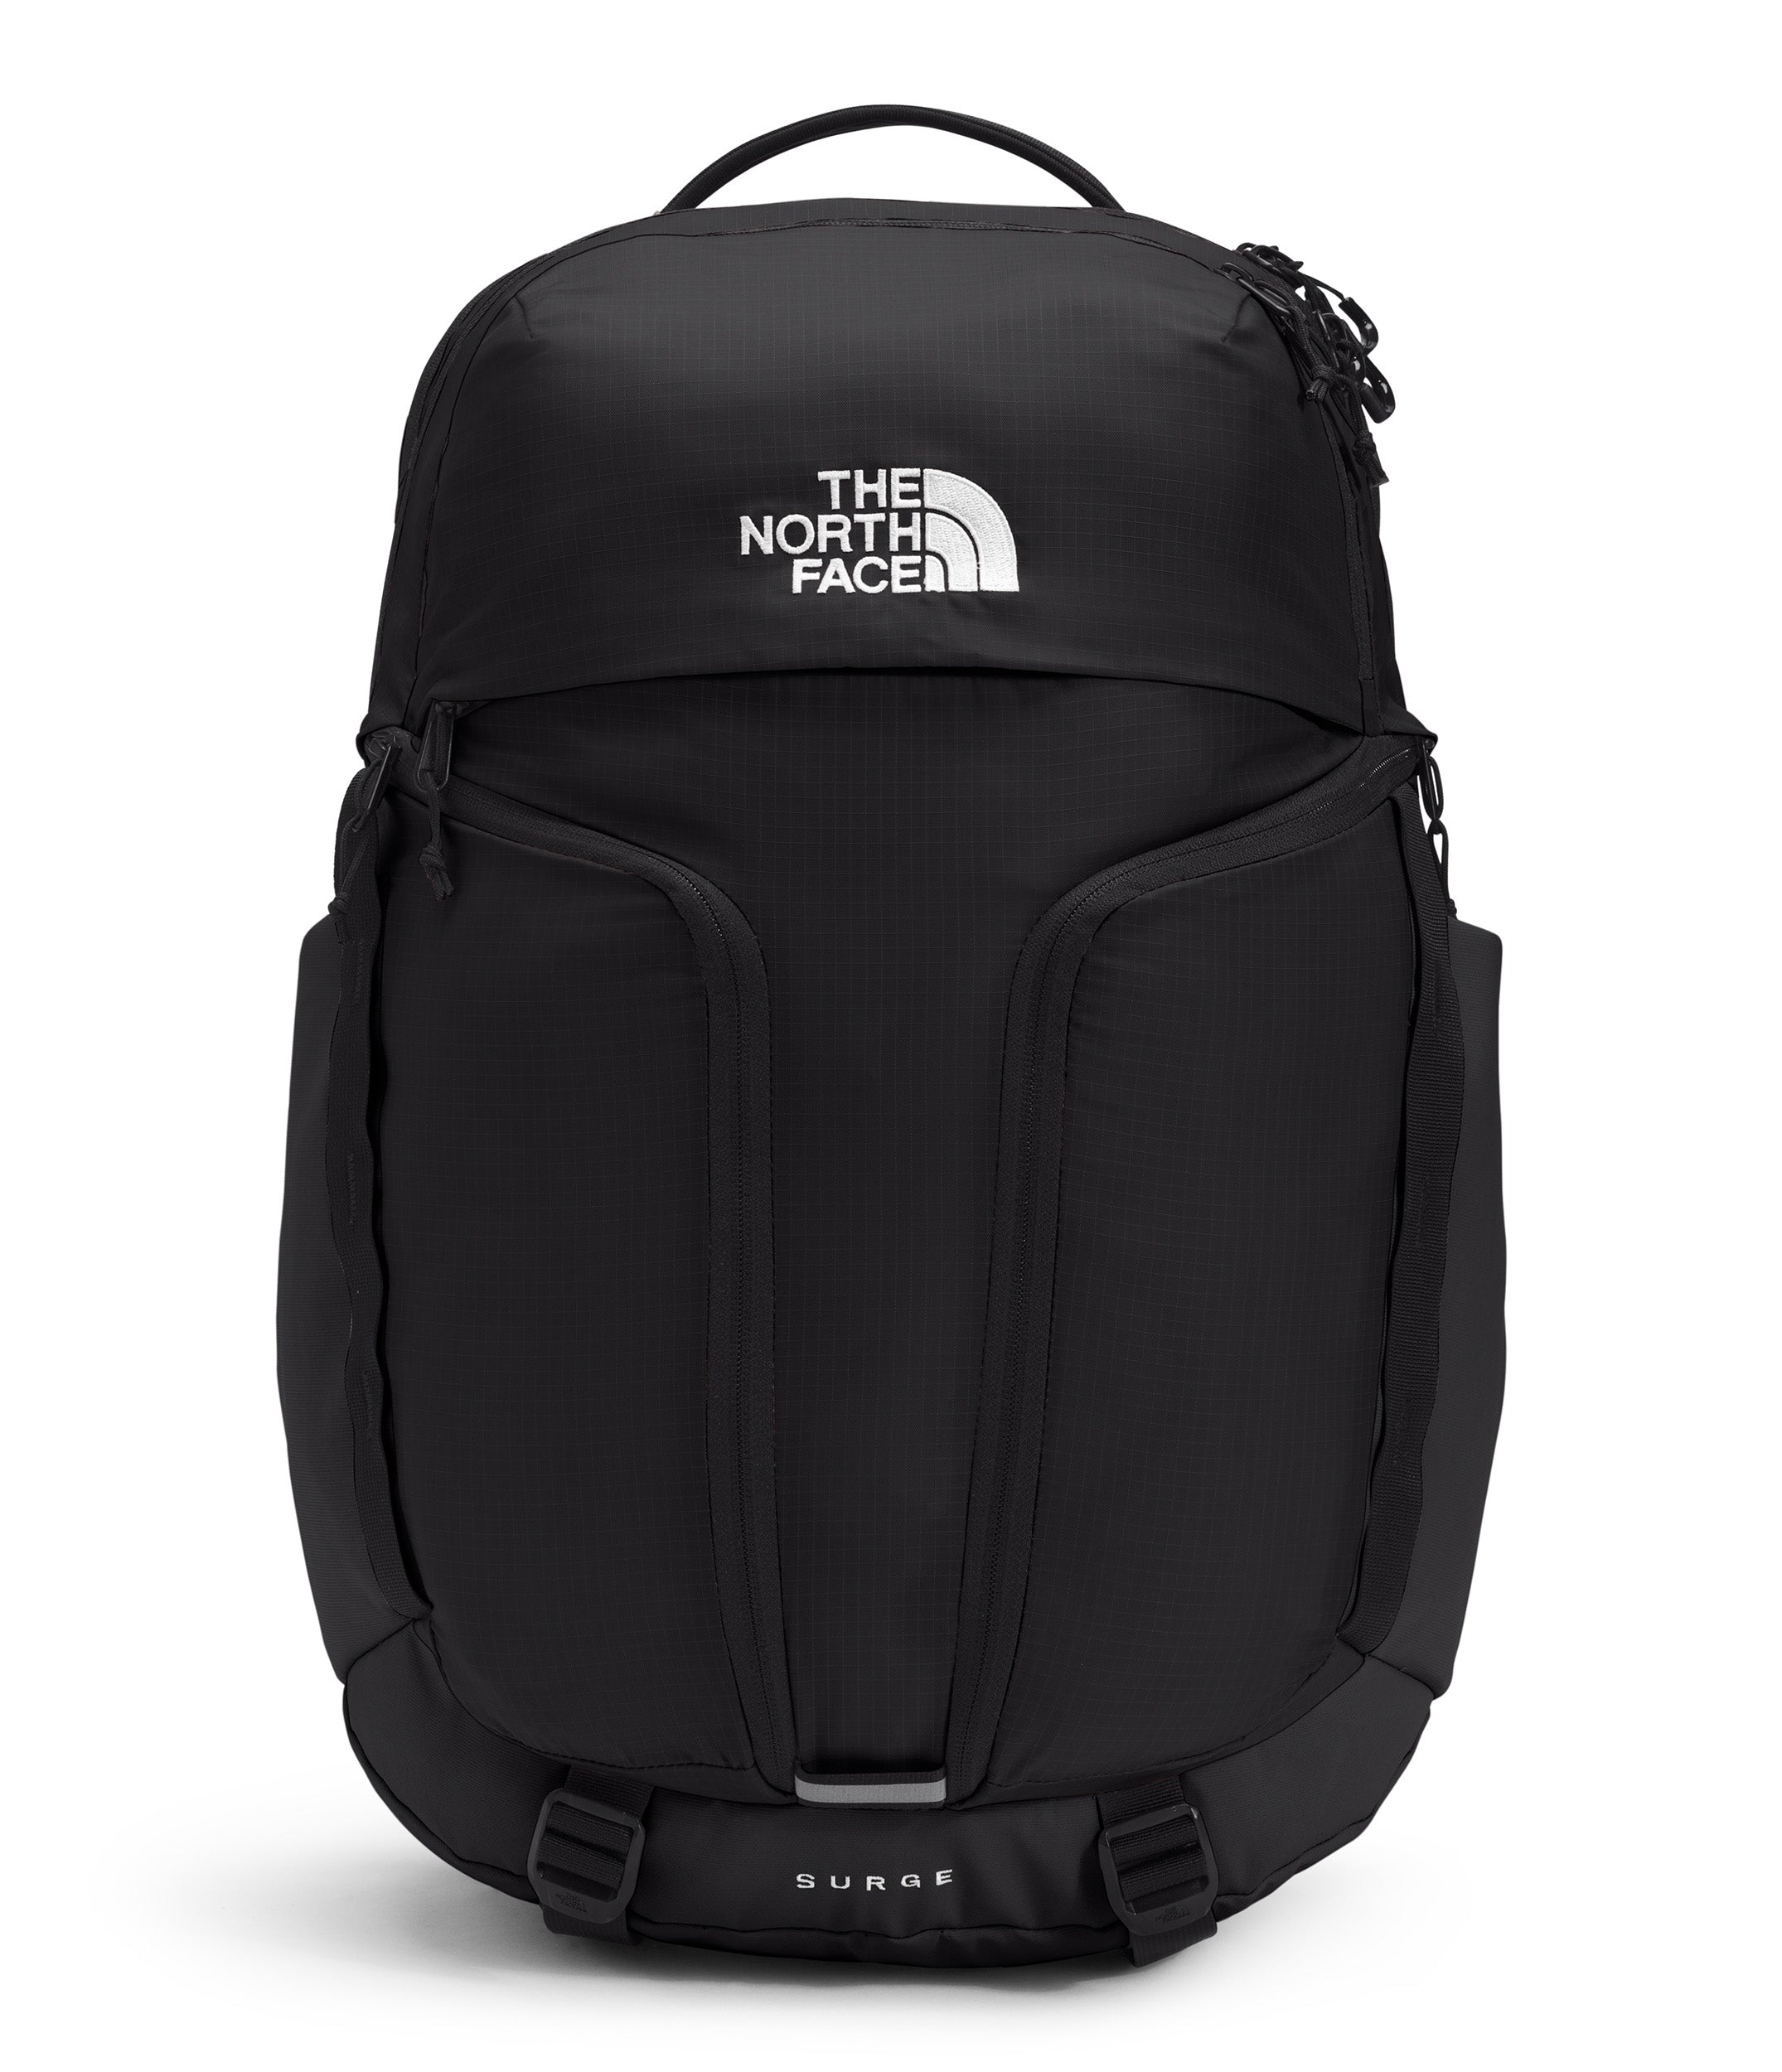 The North Face Surge Backpack Accessories North Face TNF Black/TNF Black TNF Black/TNF Black-KX7  